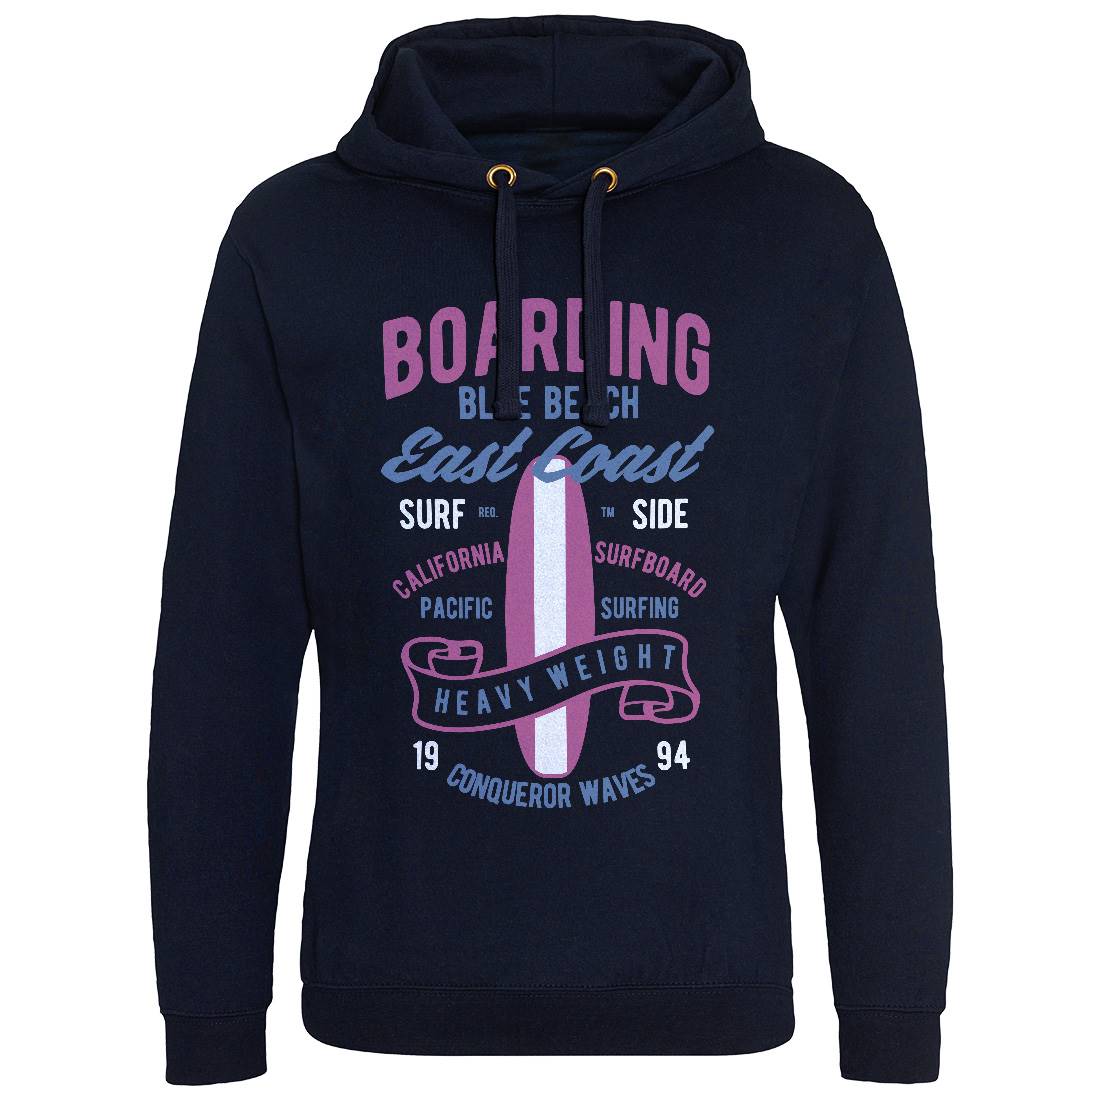 Boarding Blue Mens Hoodie Without Pocket Surf B381